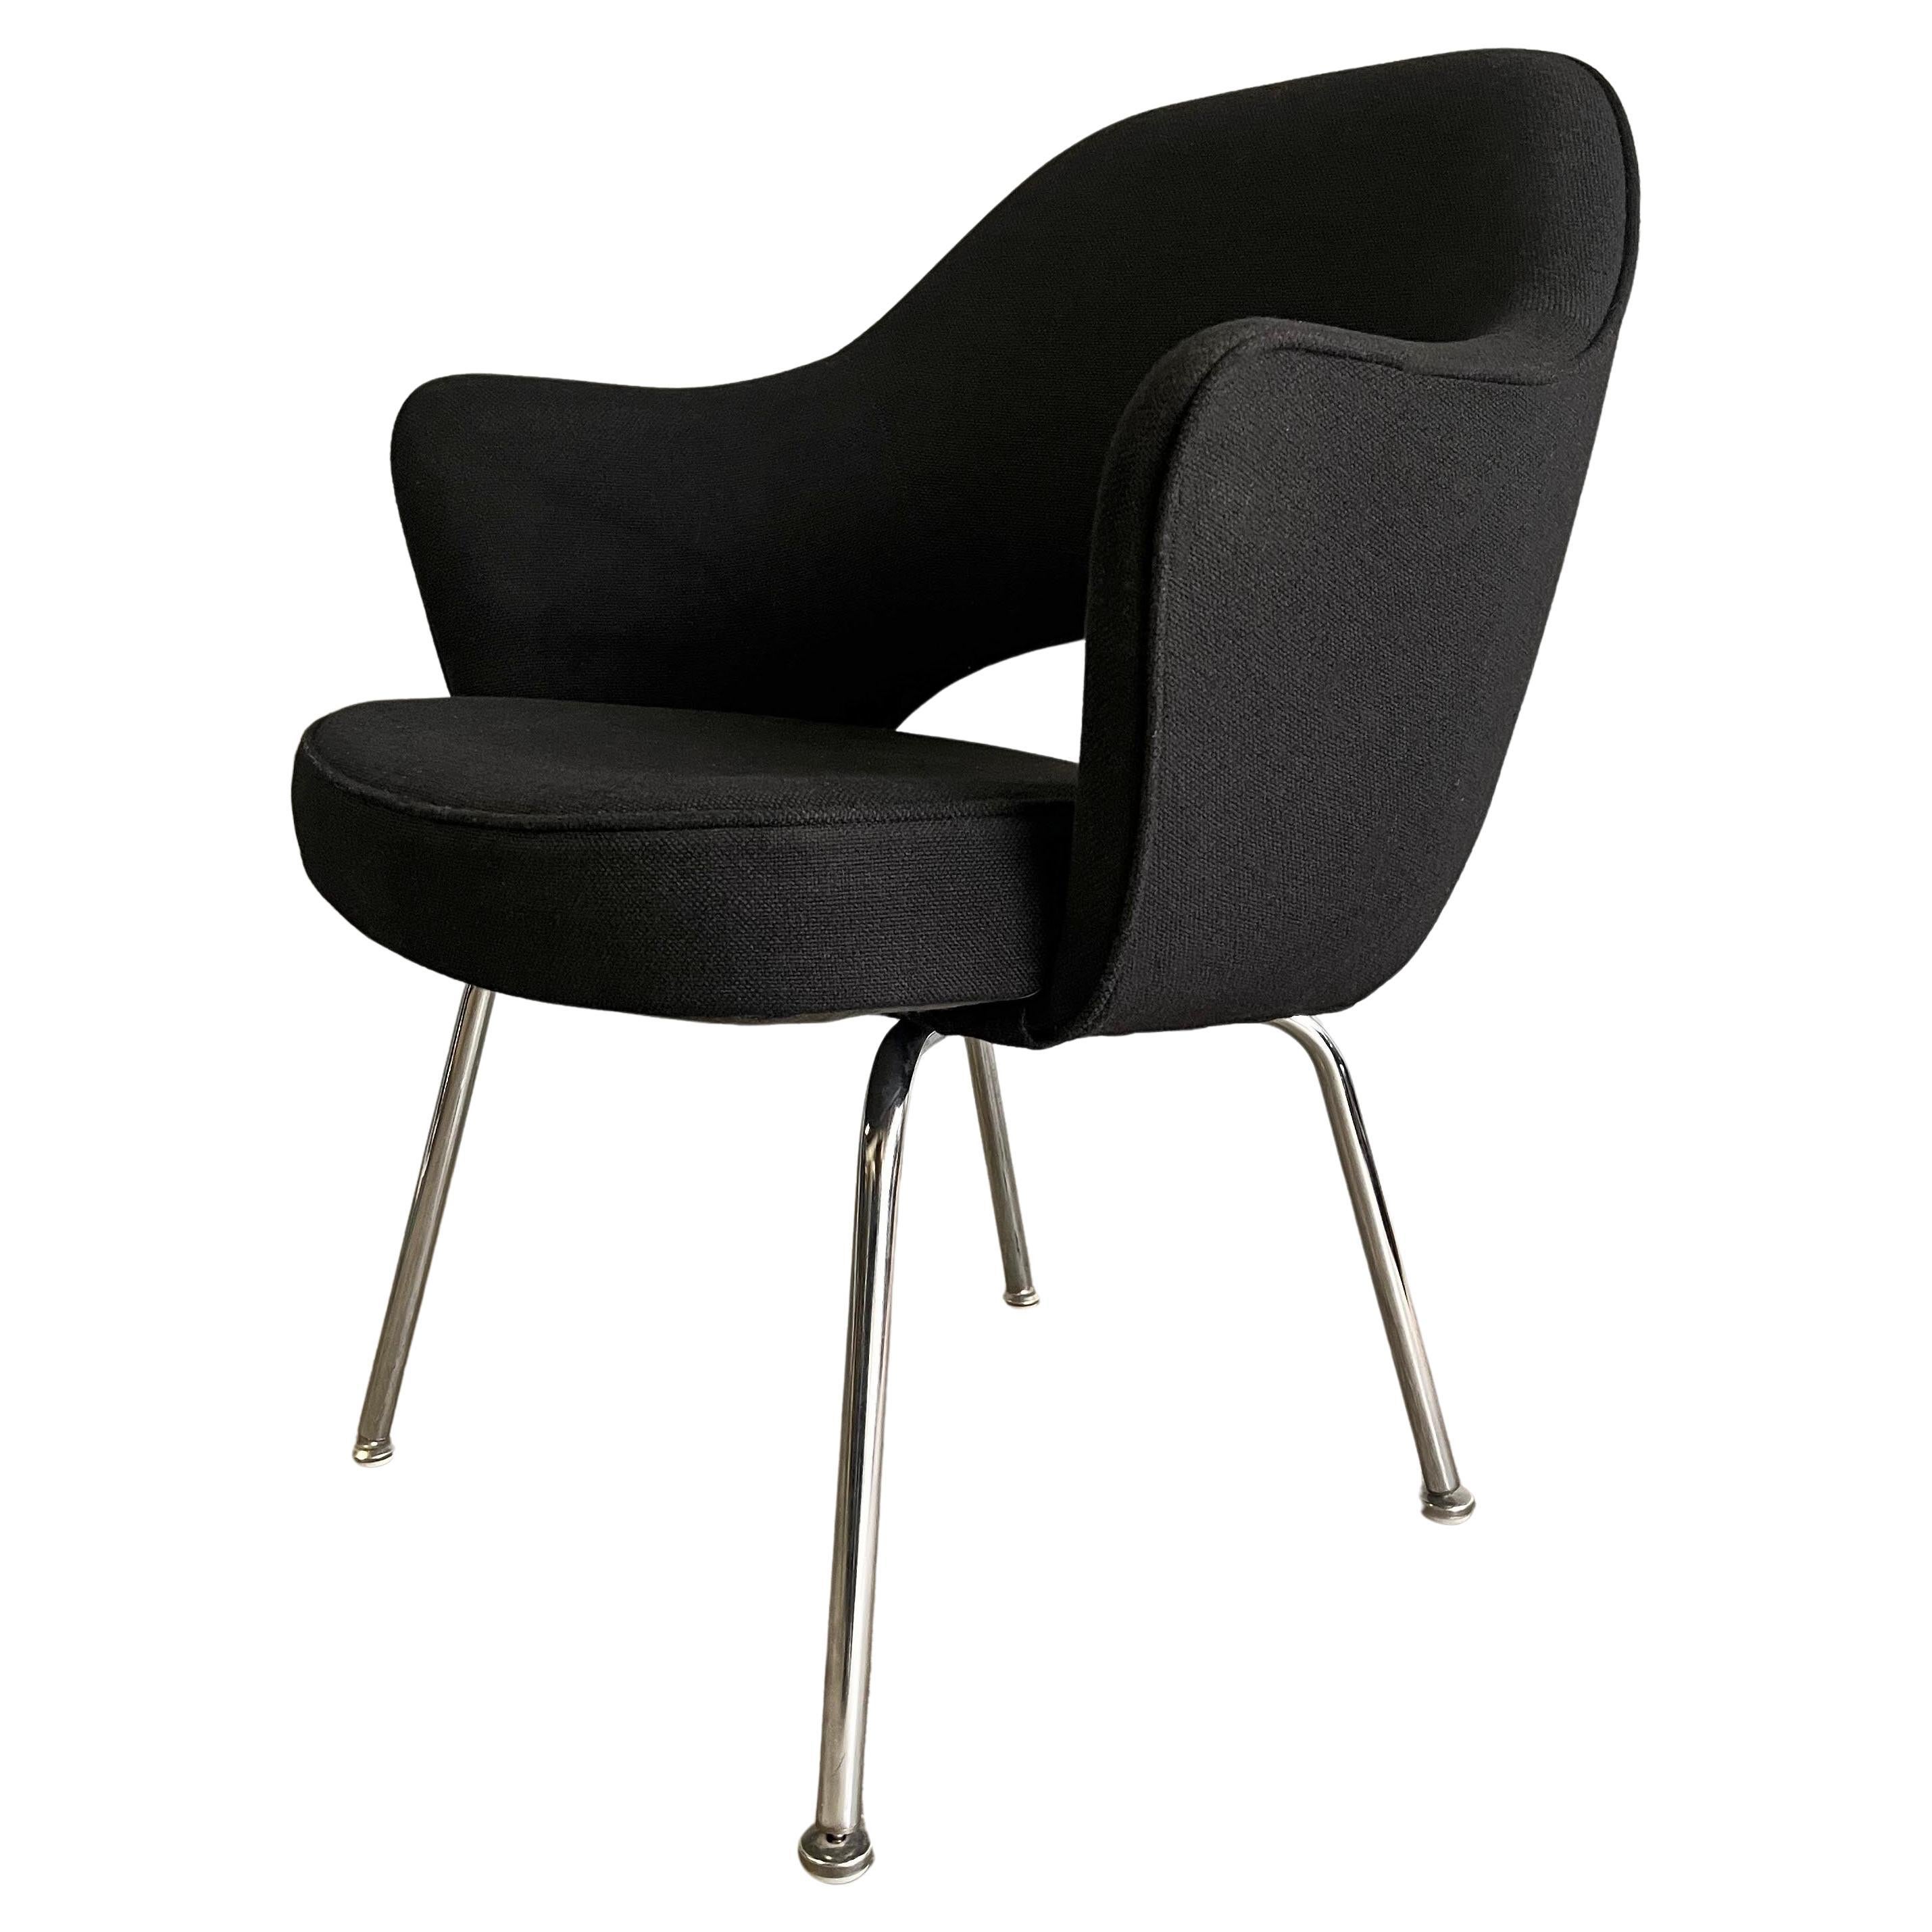 Eero Saarinen for Knoll Executive/Dining Chairs Up to 30